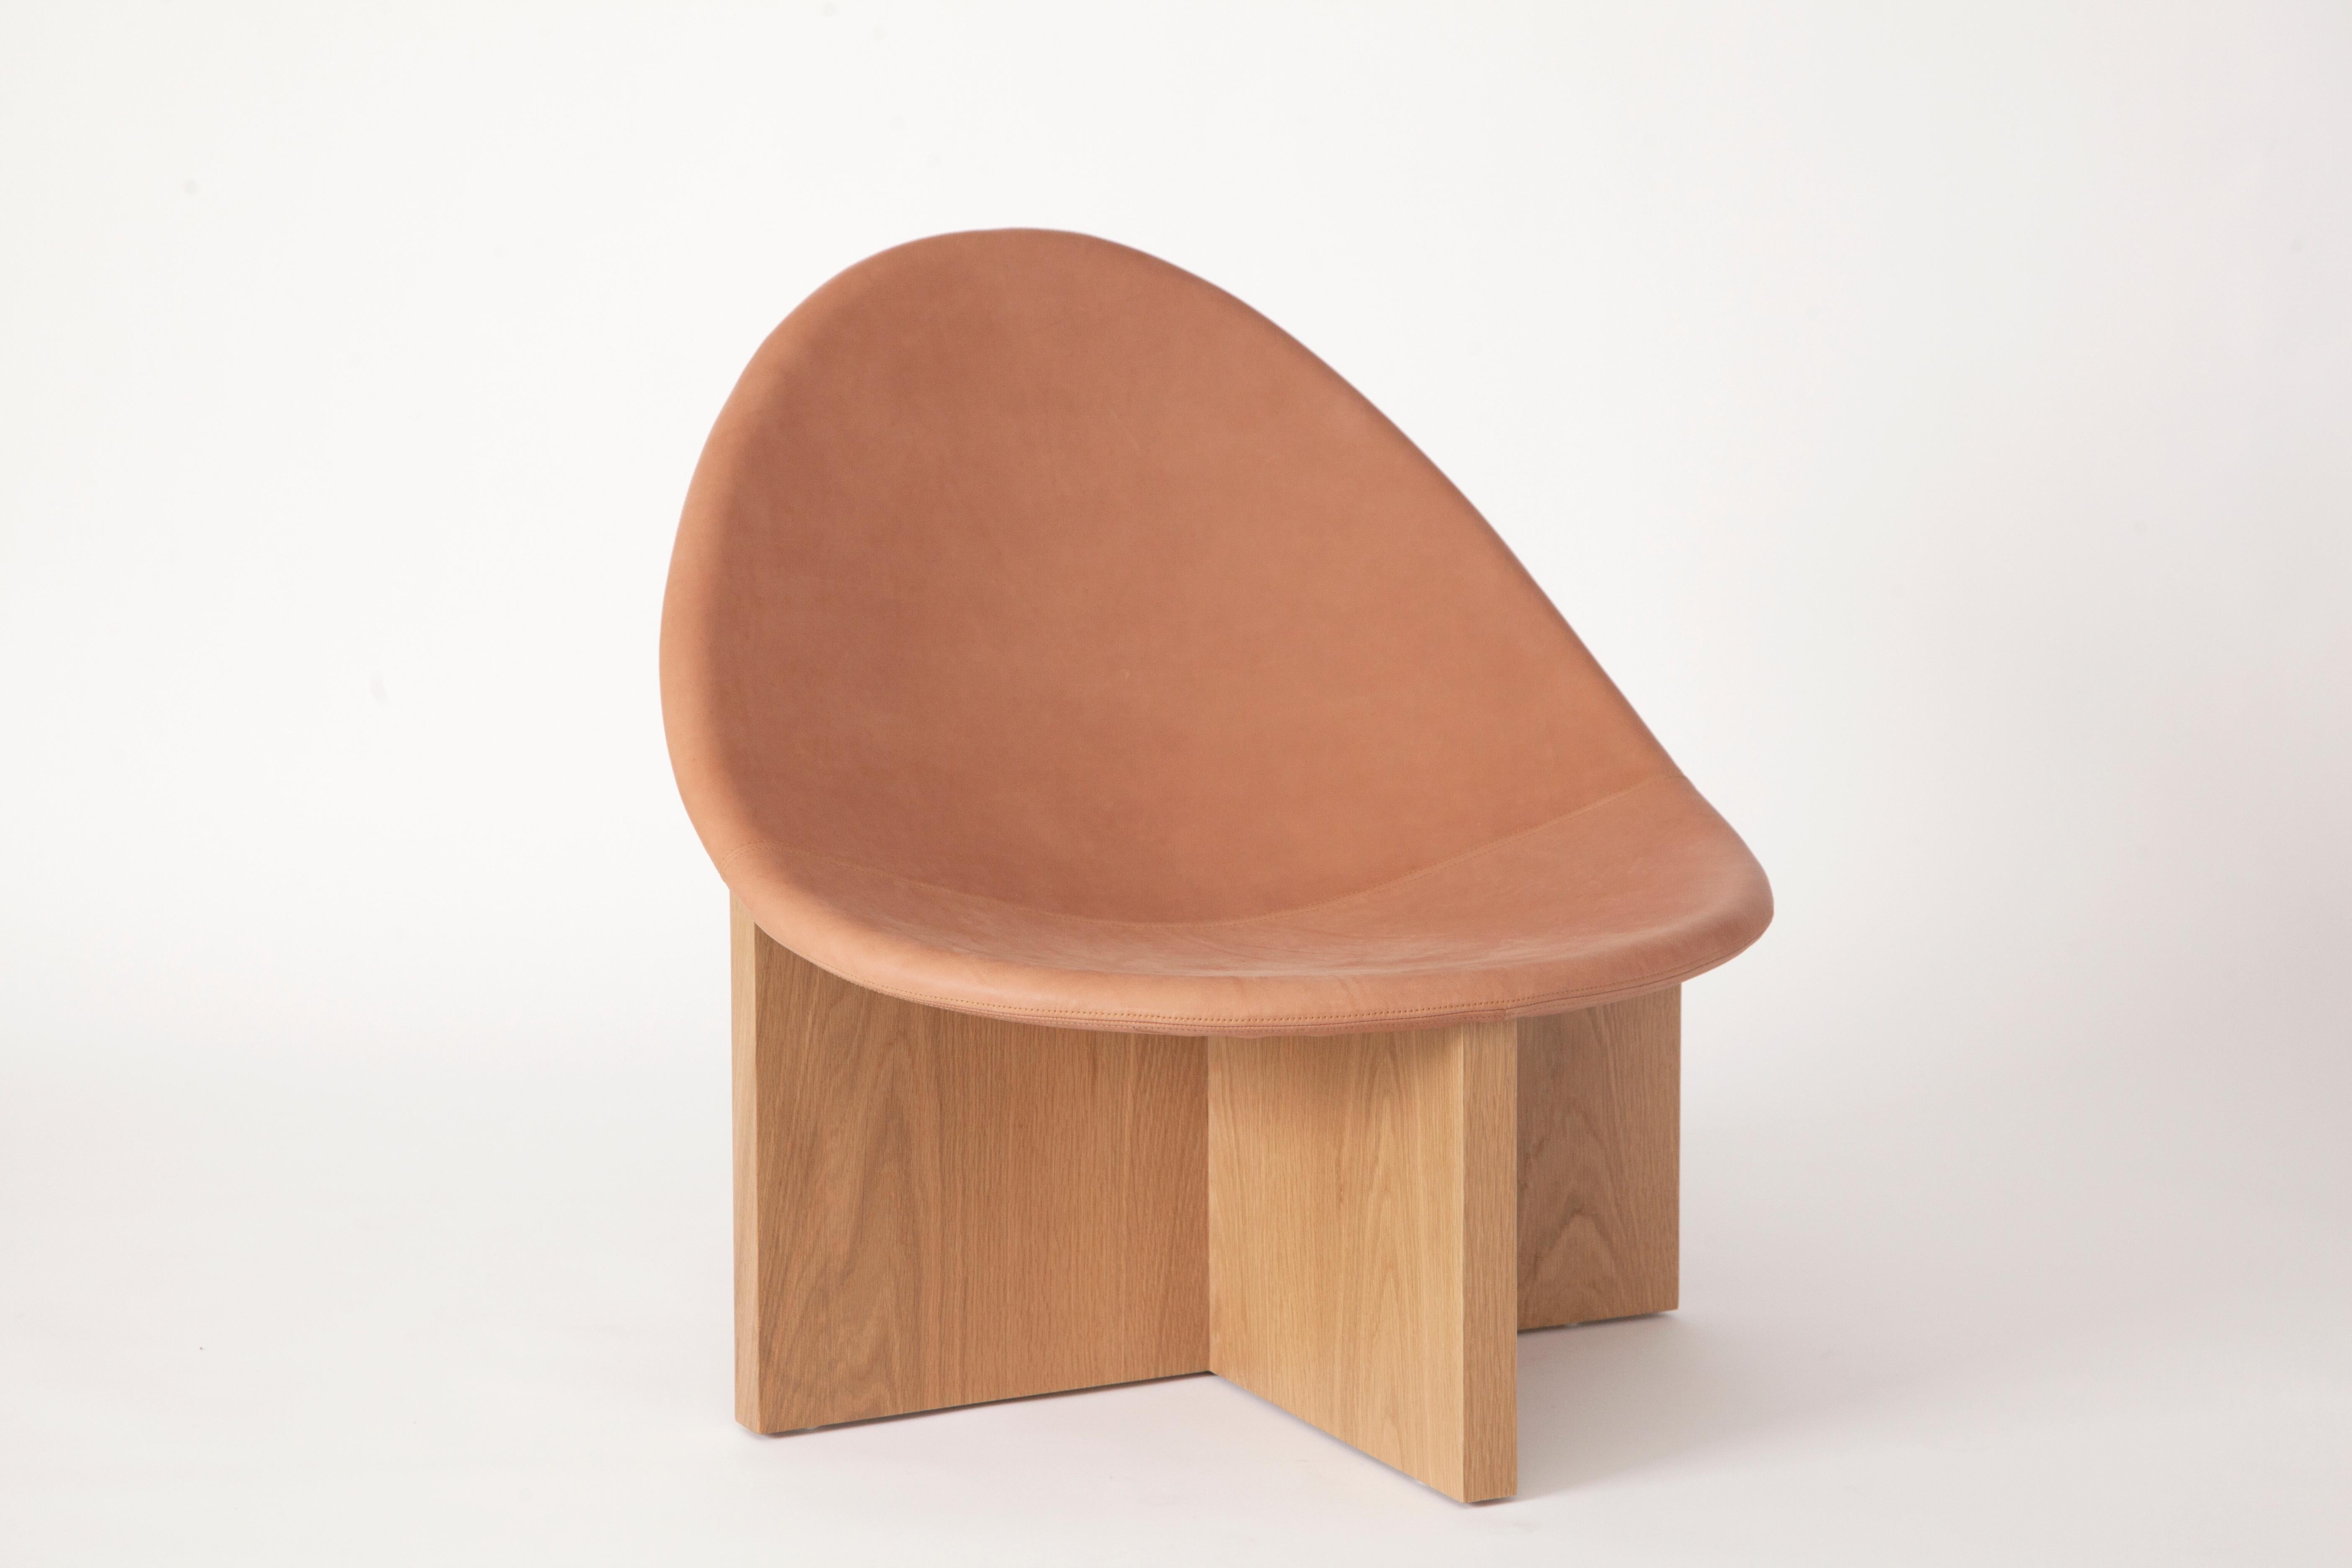 Blush Nido lounge chair by Estudio Persona
Dimensions: W 76.2 x D 78.8 x H 76.2 cm
Materials: Wood, upholstered seat

Lounge chair made from a solid wood base with an upholstered seat.
Solid wood base options: White oak,maple, walnut, stained